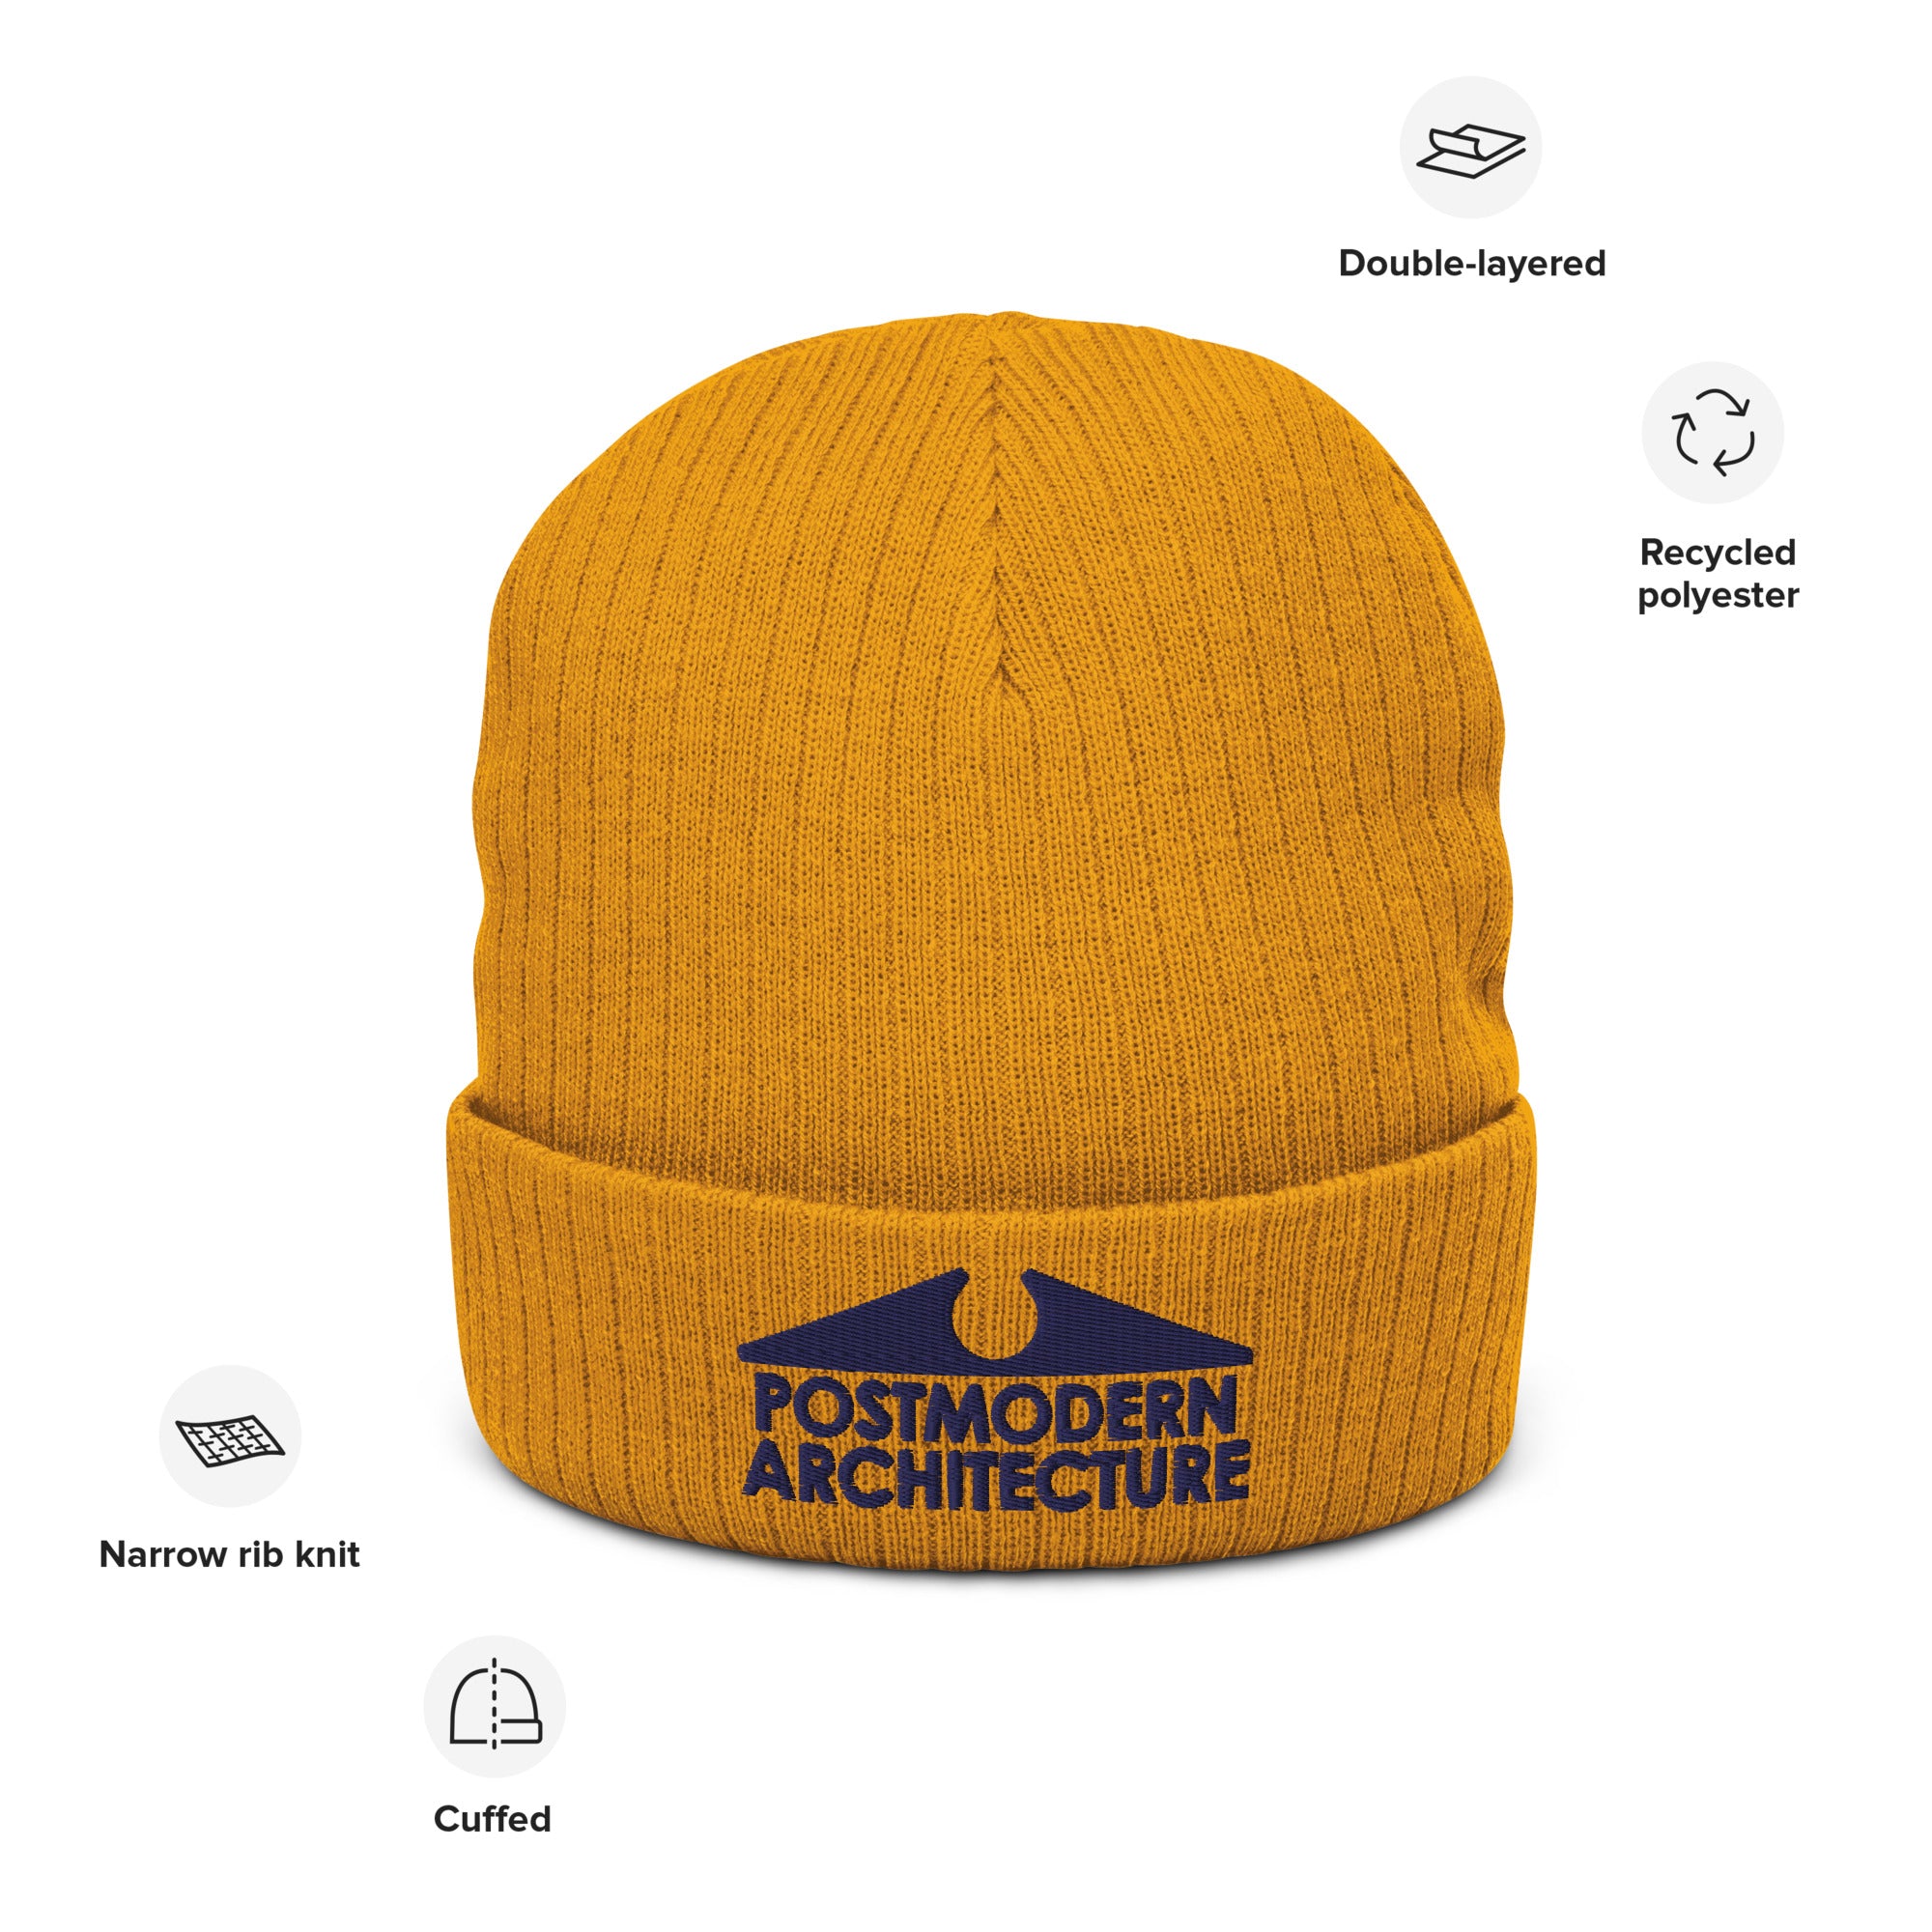 Postmodern Architecture Ribbed Knit Beanie